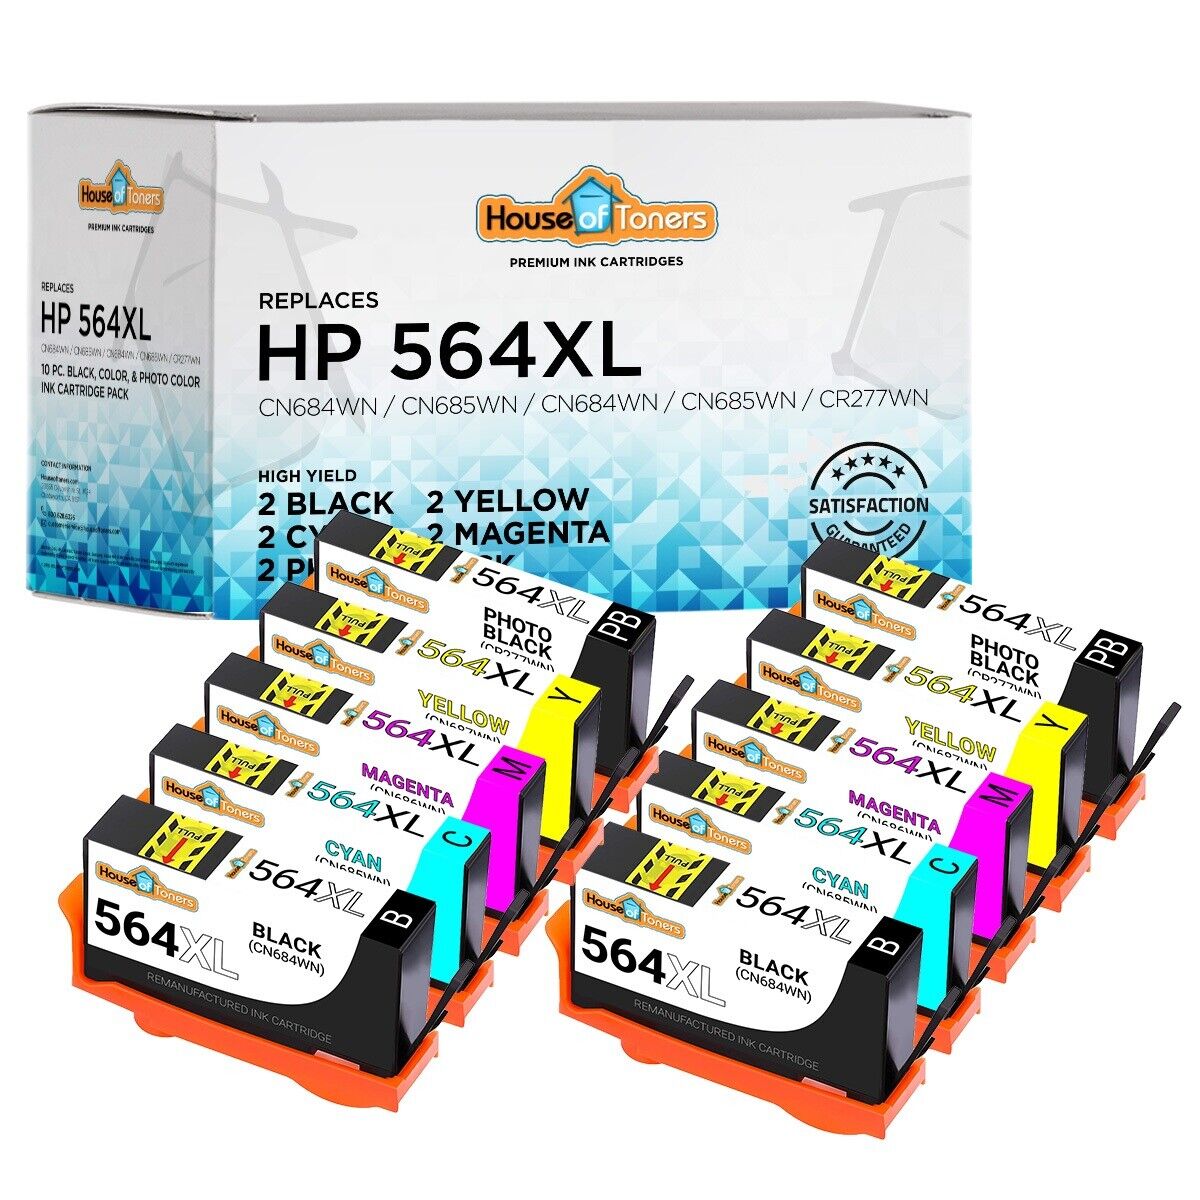 10PK for HP 564XL Ink Cartridges for Photosmart 5520 5525 6520 6525 7520 7525 